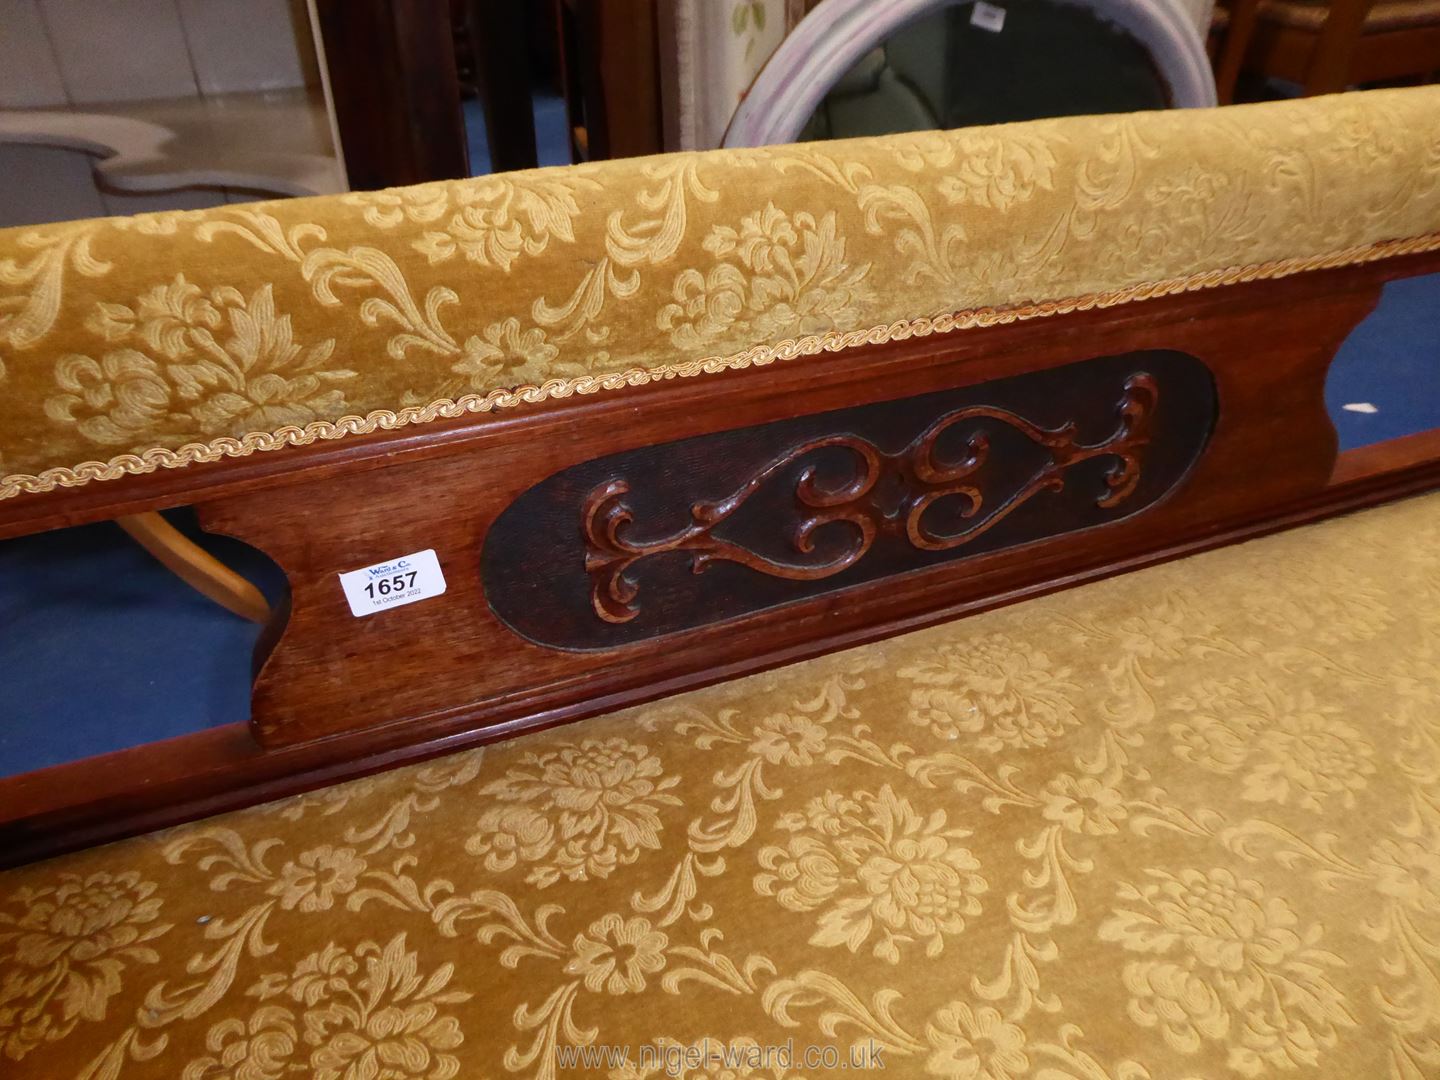 A circa 1900 Chaise Longue standing on turned legs and upholstered in brown/gold coloured shadow - Image 3 of 5